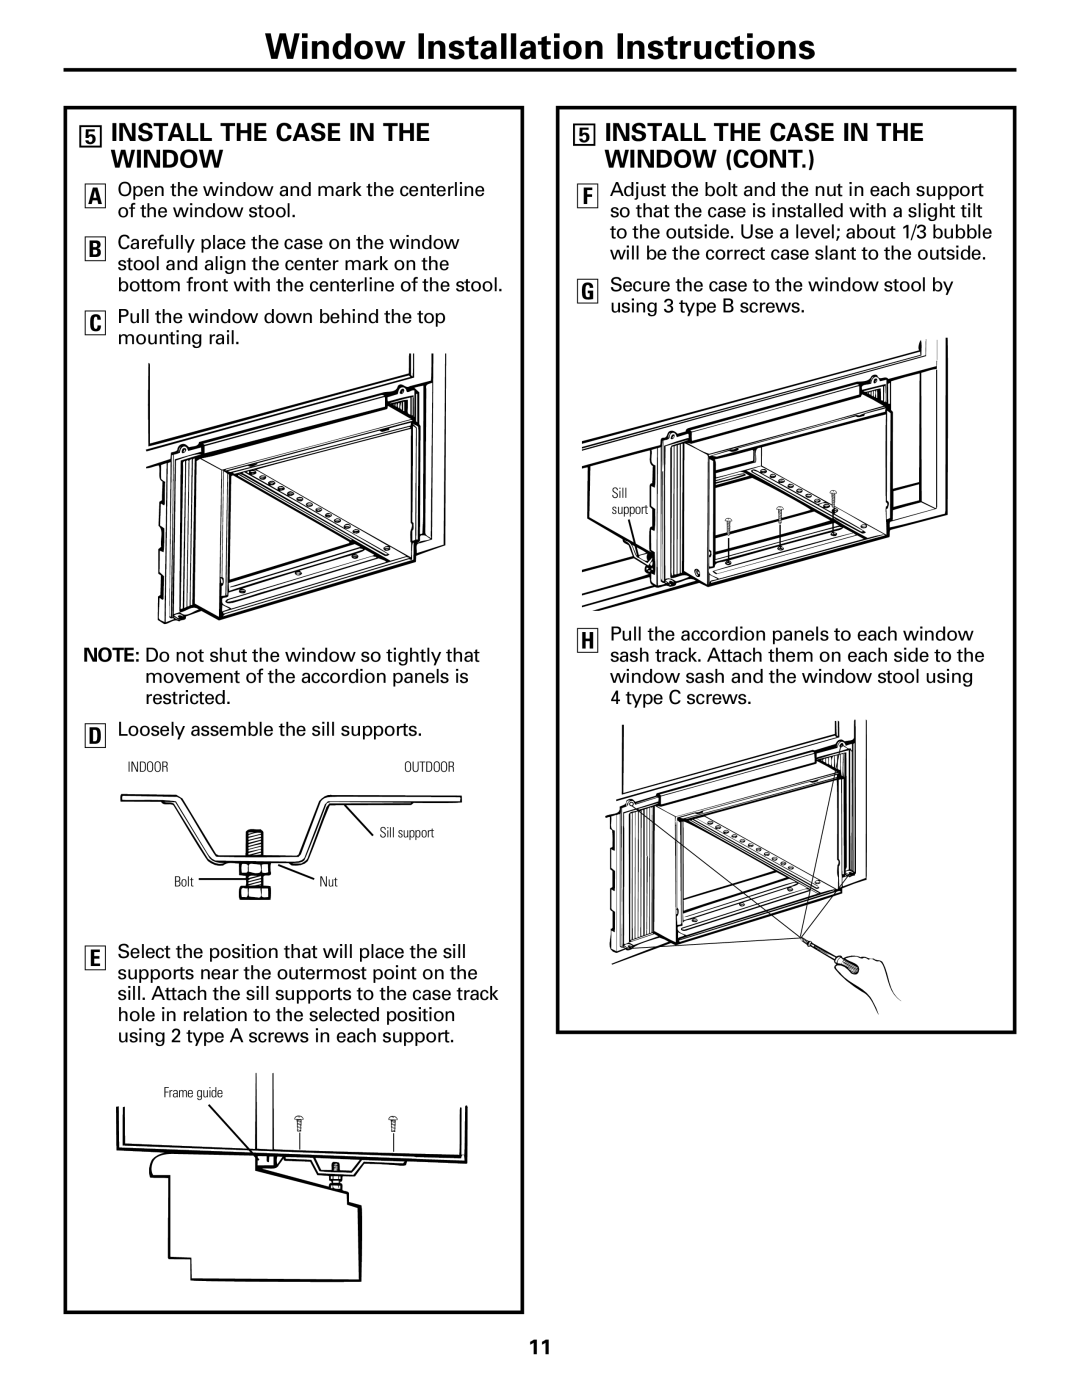 GE AGQ12DK installation instructions 5INSTALL THE CASE IN THE WINDOW CONT, Window Installation Instructions 